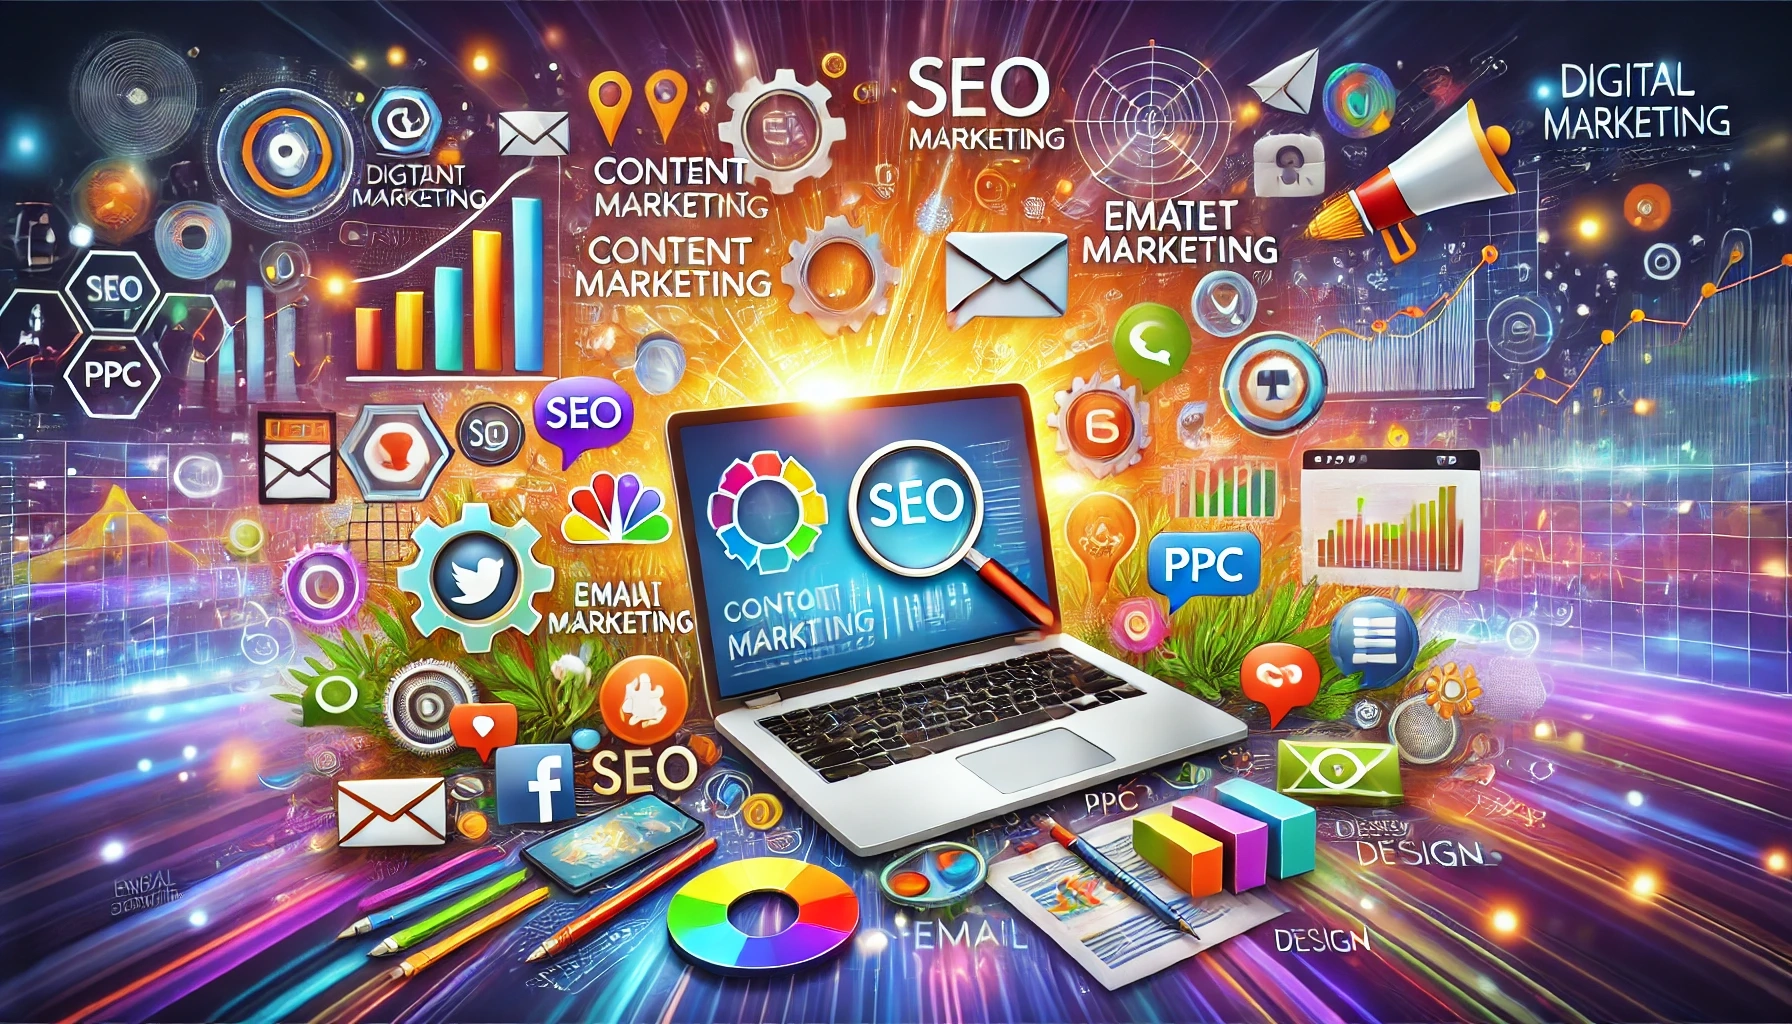 What is SEO in Digital Marketing & How Does It Work?